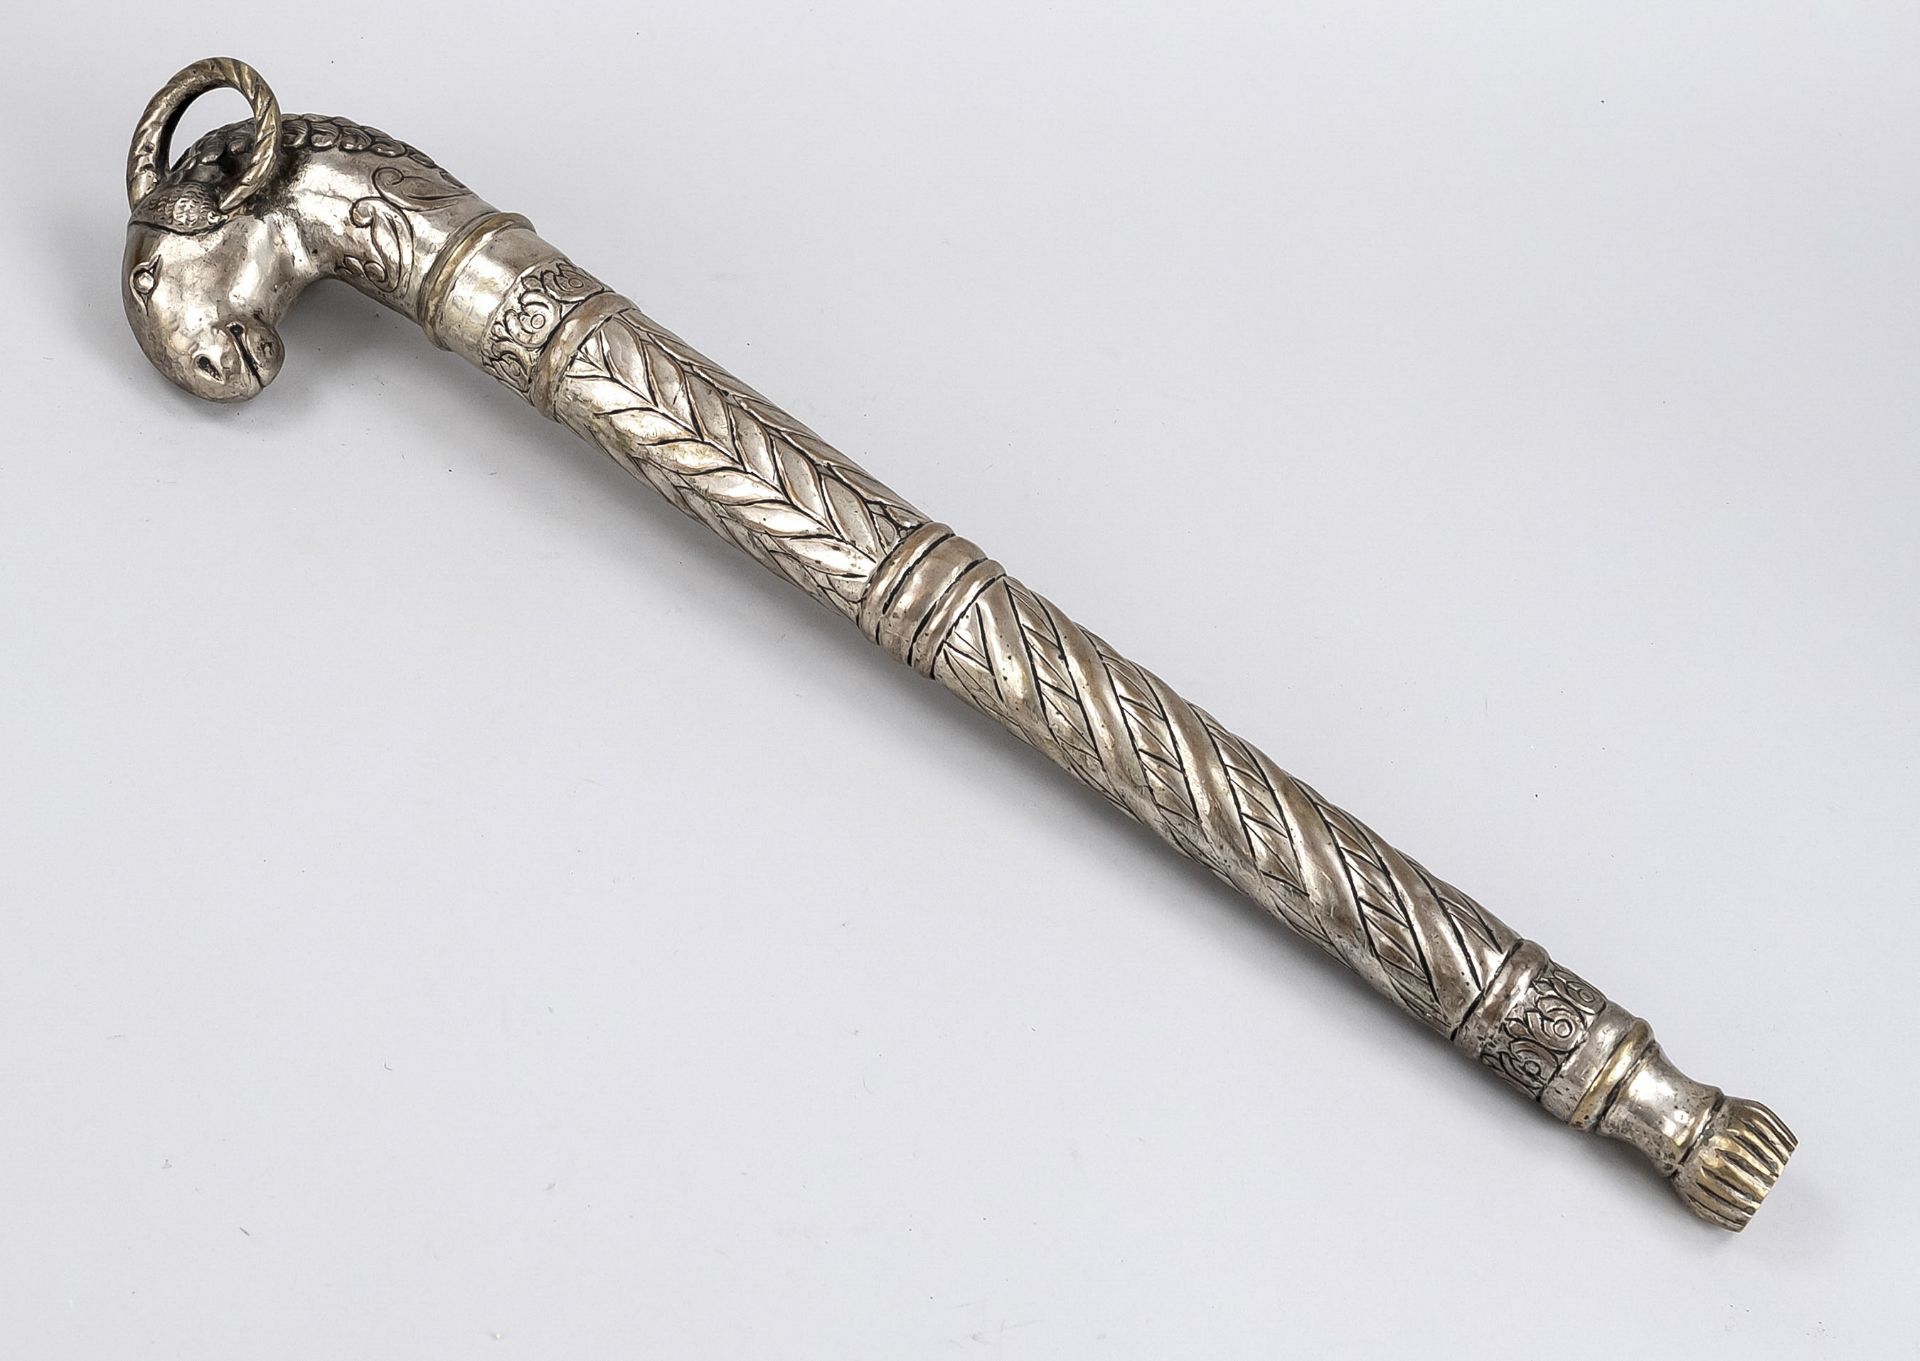 Blessed ram head scepter, India, 20th century, chased white metal, modeled after the silver Maharaja